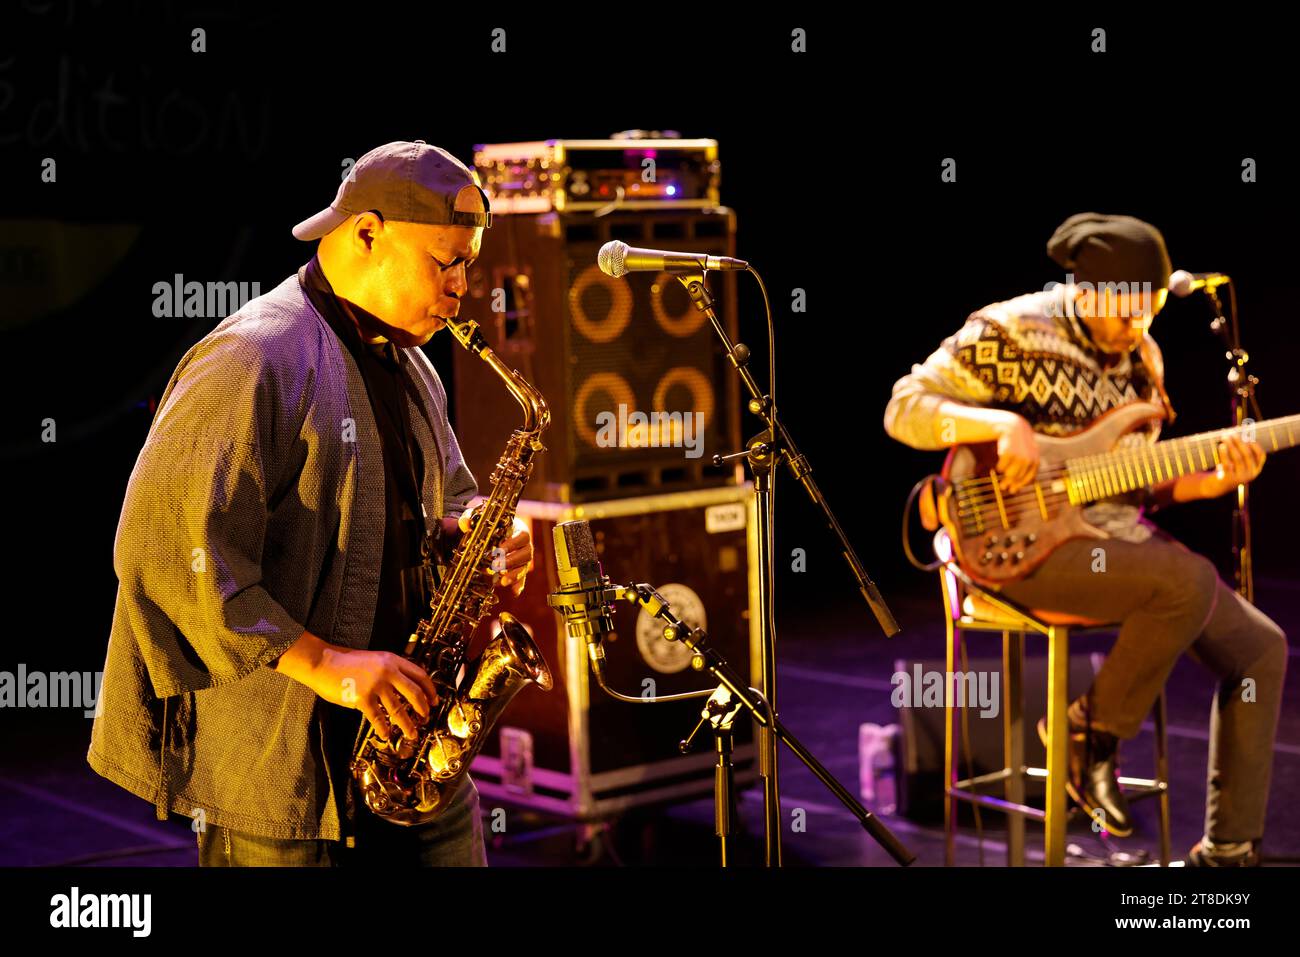 Limoges, France. November 19, 2023. American saxophonist, improviser and composer Steve Coleman in concert at the Eclats d’Email Jazz Edition Festival in Limoges, France. Line-up: Steve Coleman – saxophone, Rich Brown – bass, Sean Rickman – drums. Photo by HM Images/Alamy Live News. Stock Photo